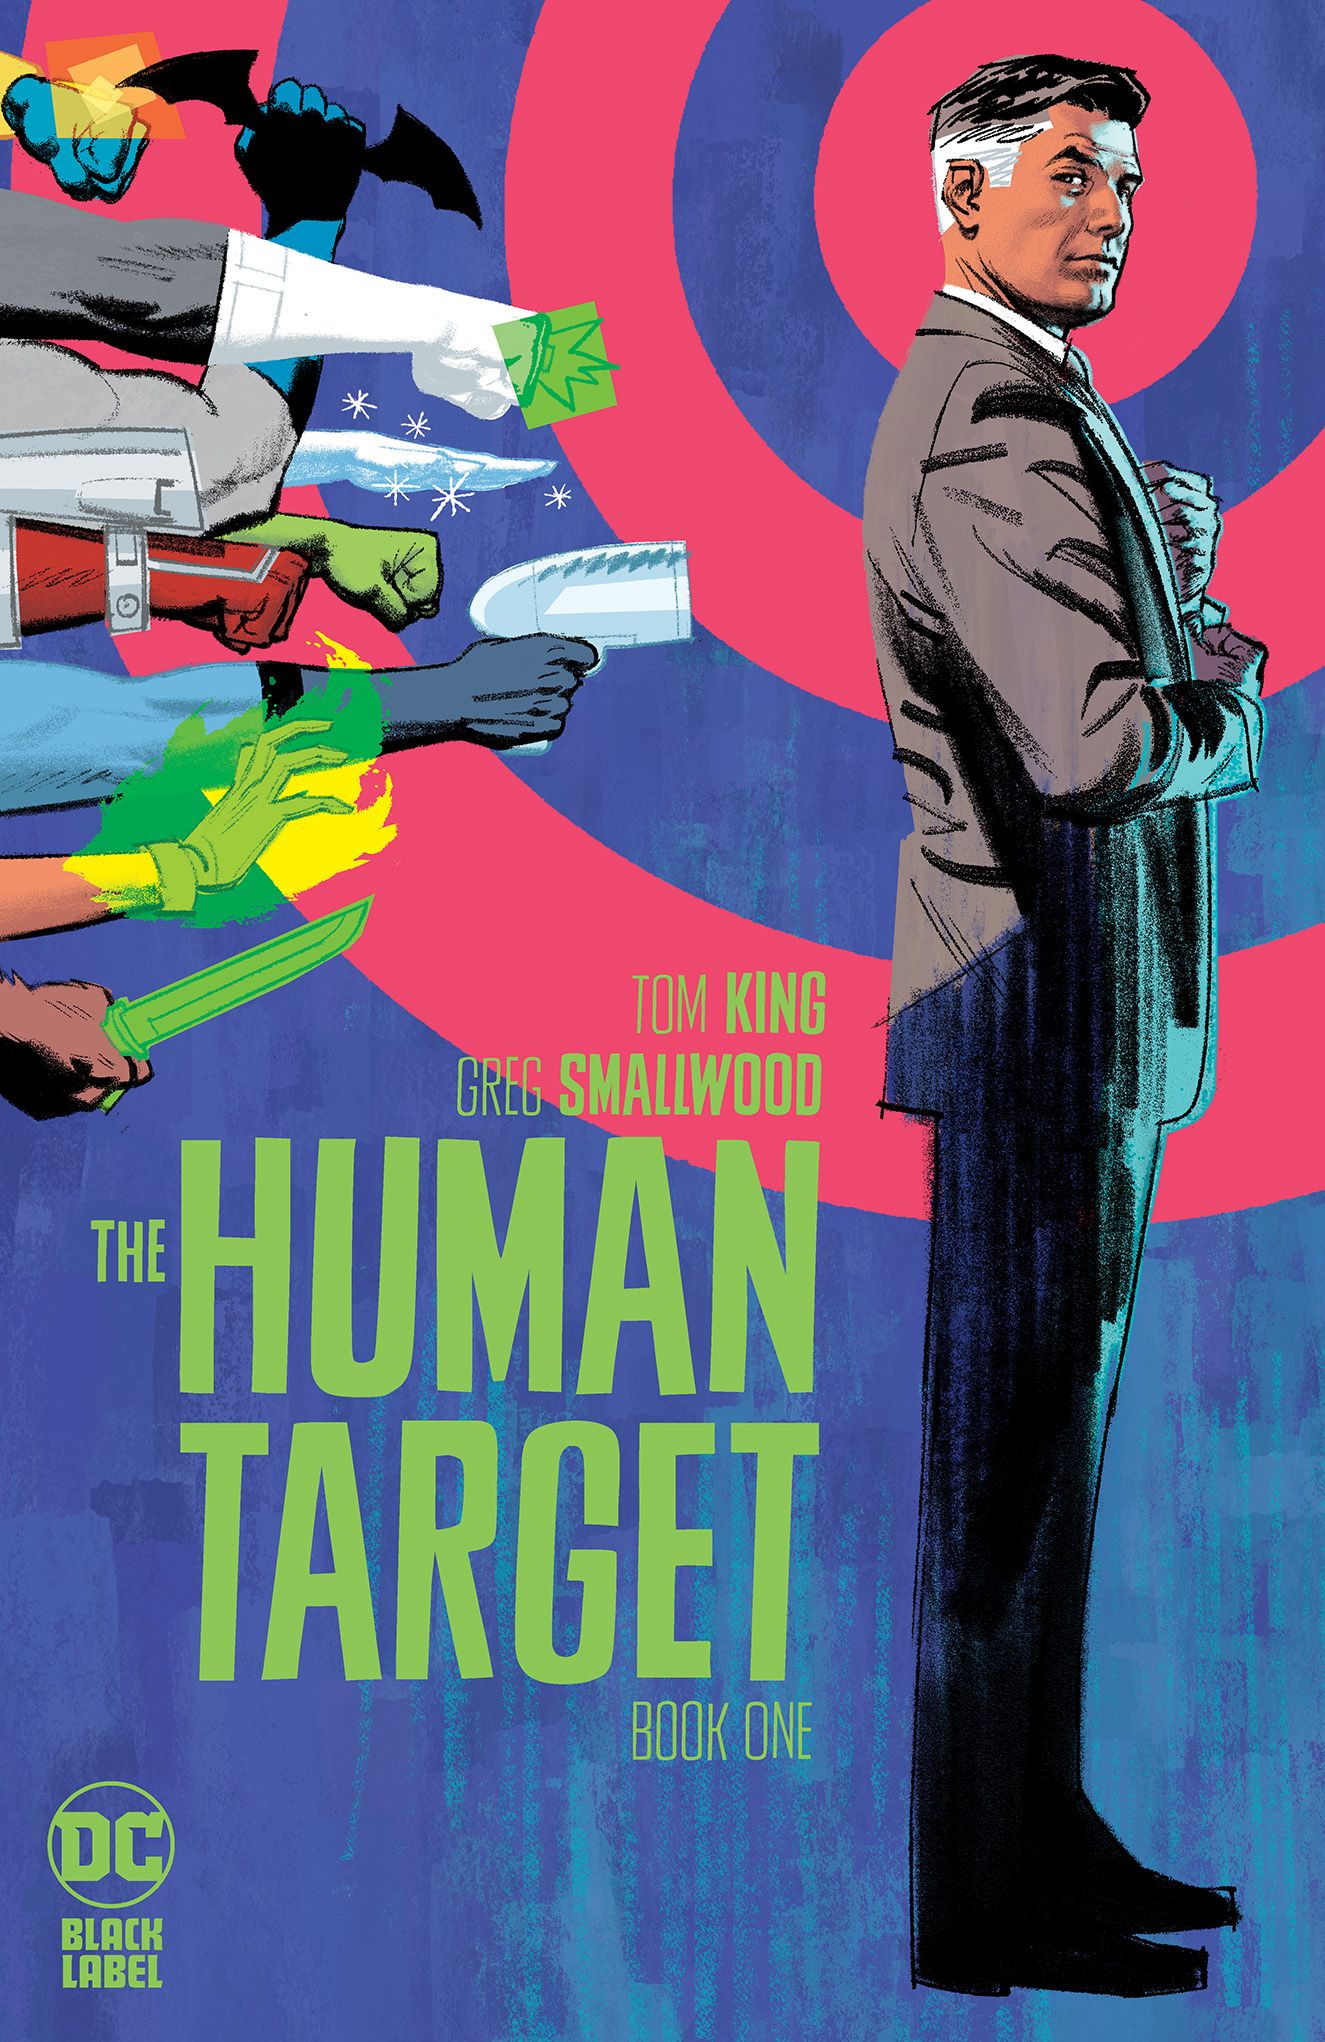 Artwork for The Human Target, by Greg Smallwood.